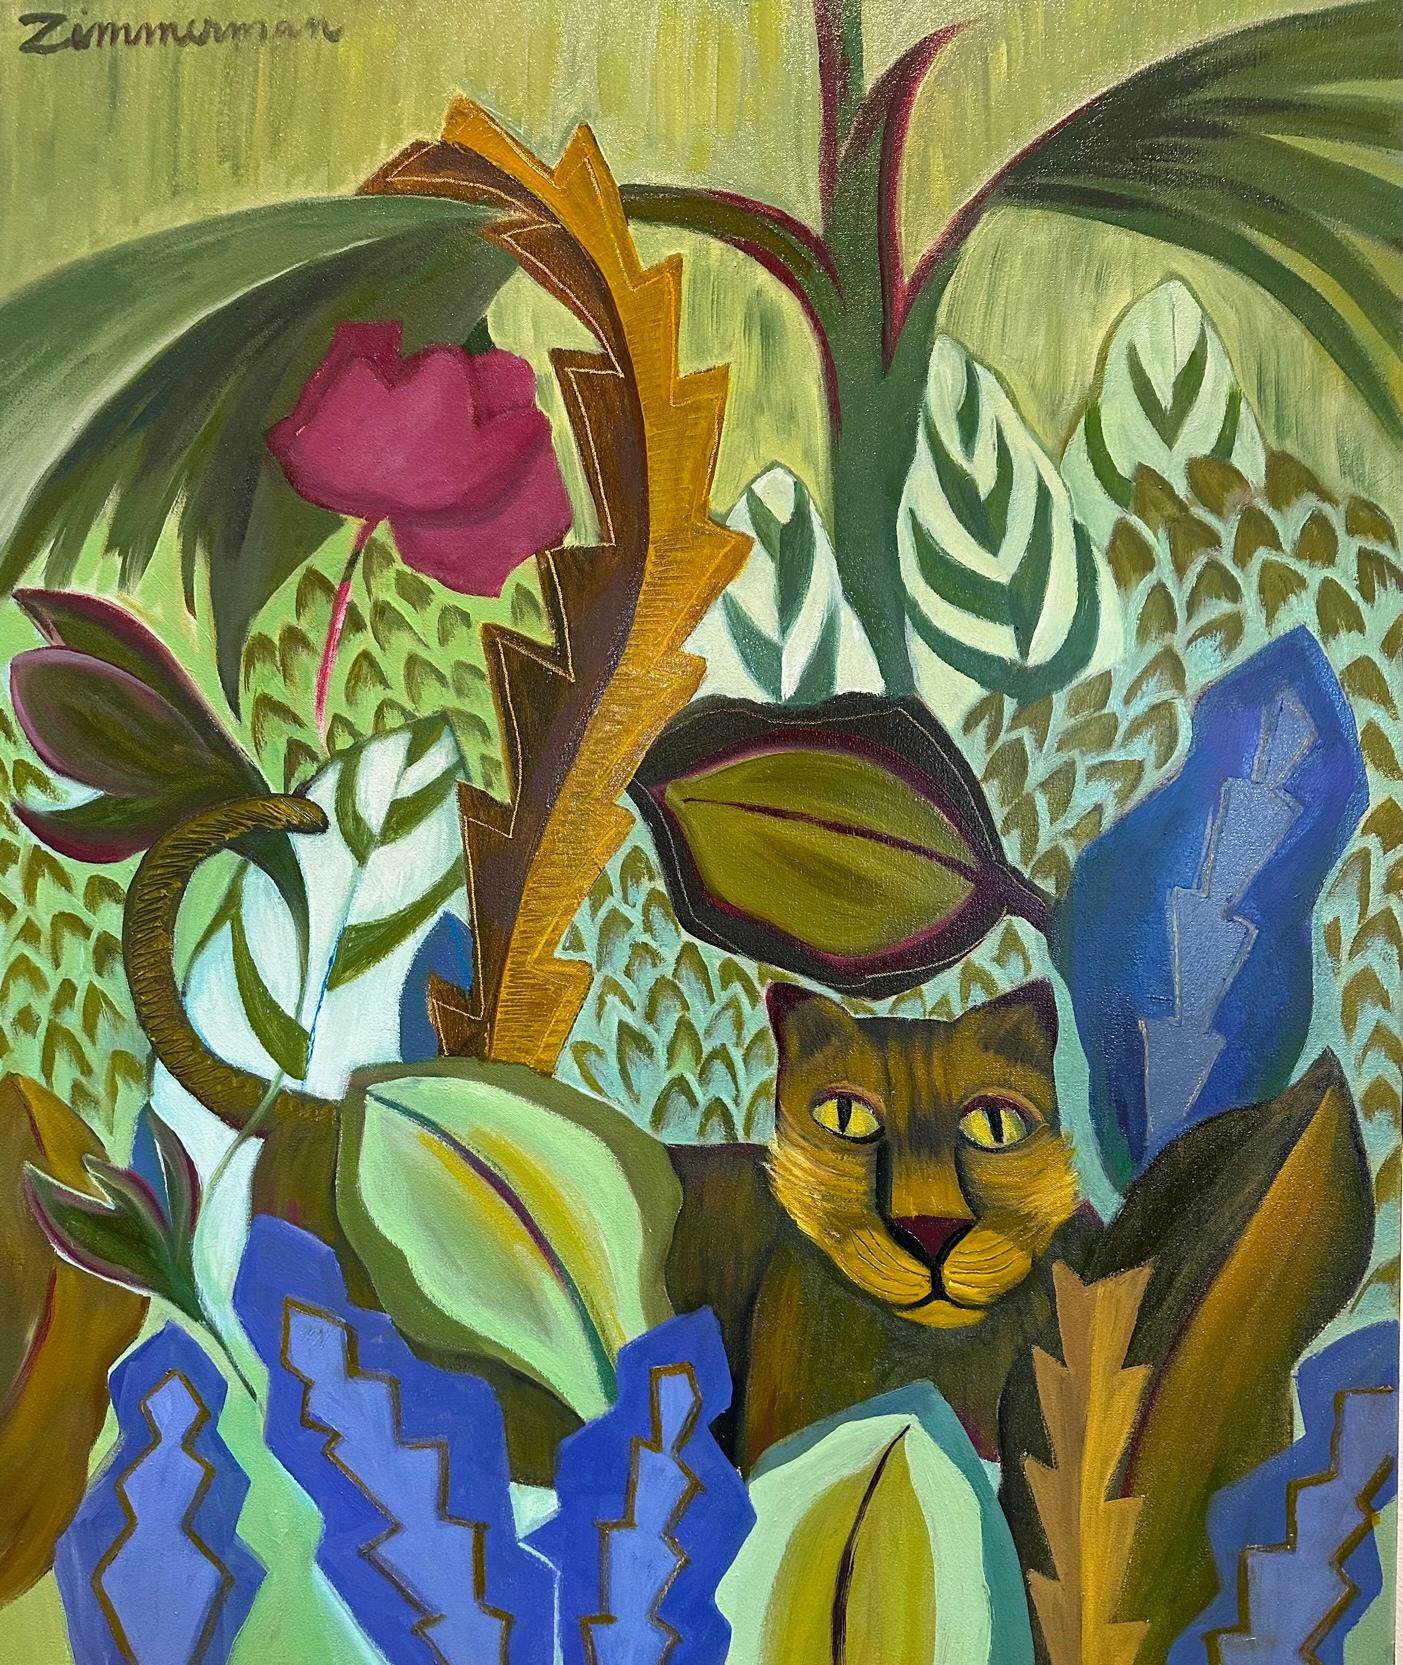 Wild Things - Animal landscape painting , Oil on canvas By Marc Zimmerman

This masterpiece is exhibited in the Zimmerman Gallery, Carmel CA.


Marc Zimmerman creates playful paintings, whether deep mysterious jungle or delightfully whimsical